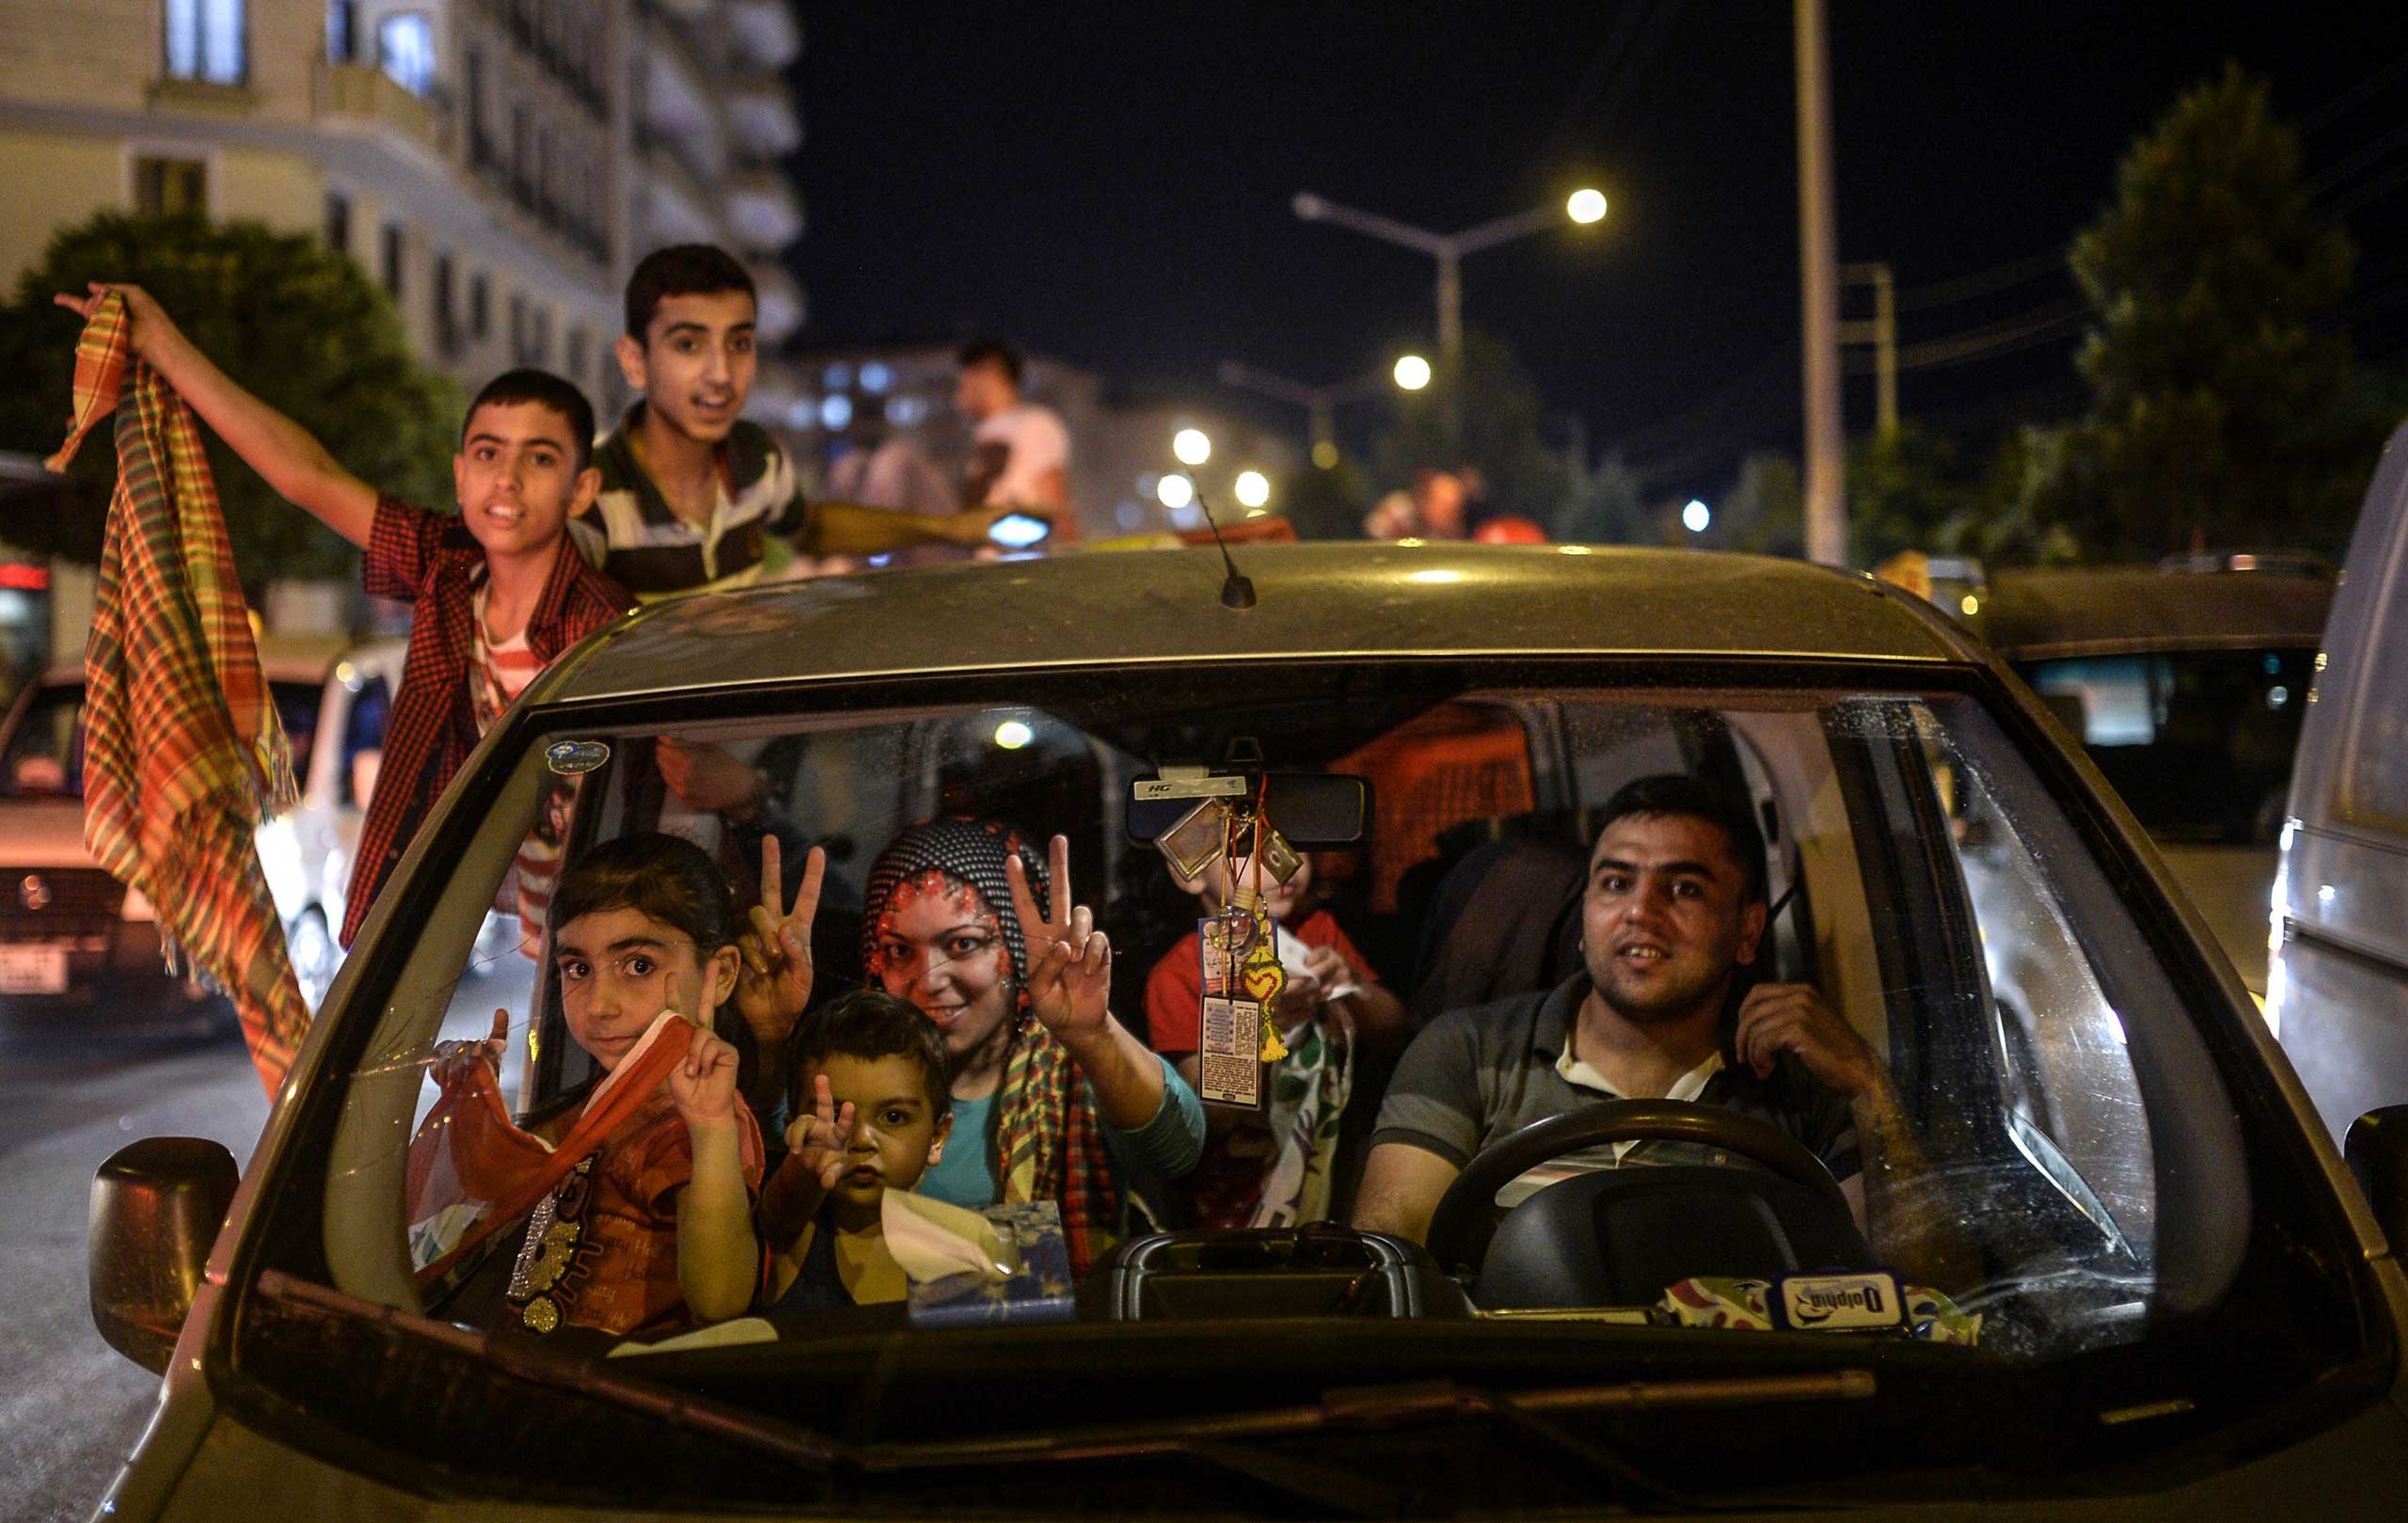 A family and children, supporters of pro-Kurdish Peoples' Democratic Party (HDP) celebrate the results of the legislative election, in Diyarbakir, Turkey, on June 7, 2015. (Bulent Kilic—AFP/Getty Images)